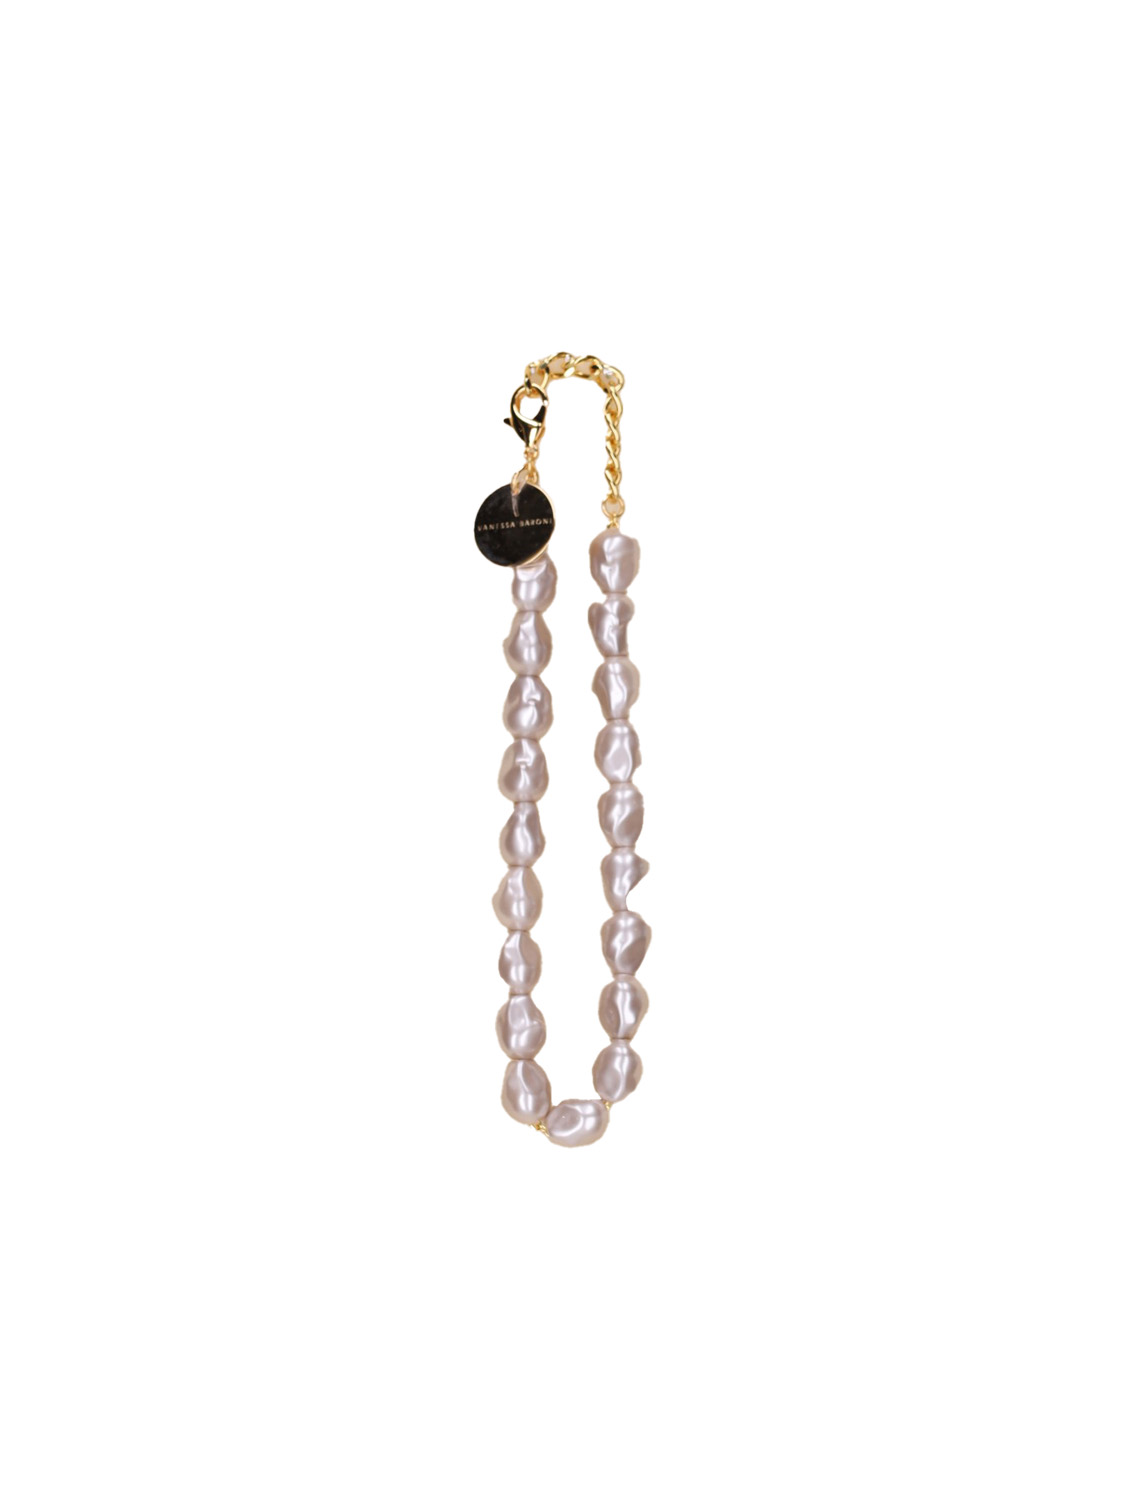 Vanessa Baroni Organic Pearl- Kette mit Anhänger  champagner One Size